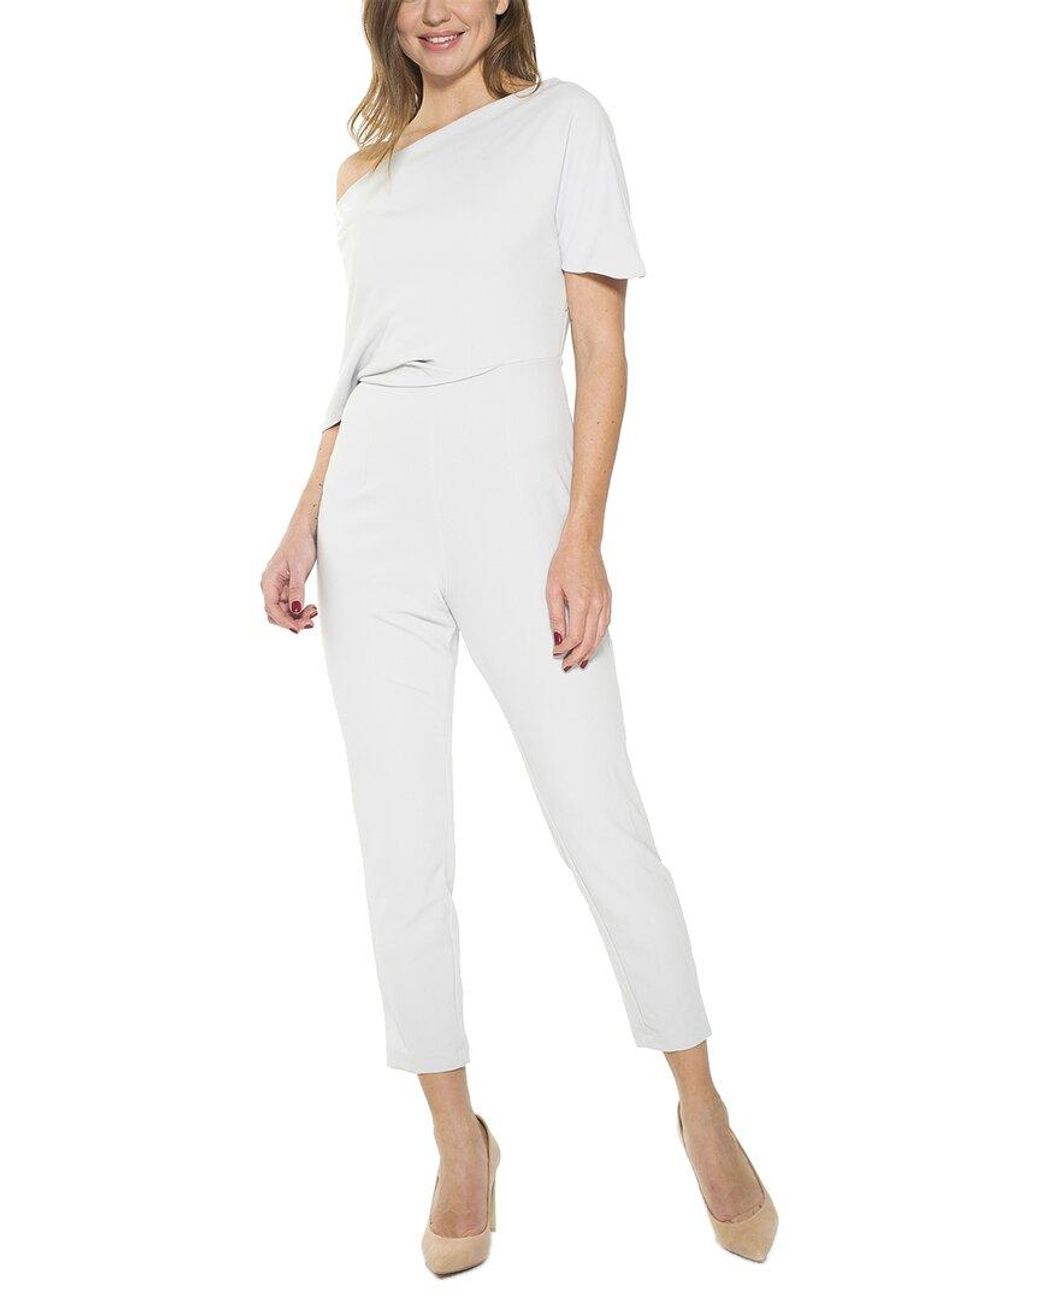 Alexia Admor Synthetic One-shoulder Jumpsuit in Slate (White) - Lyst